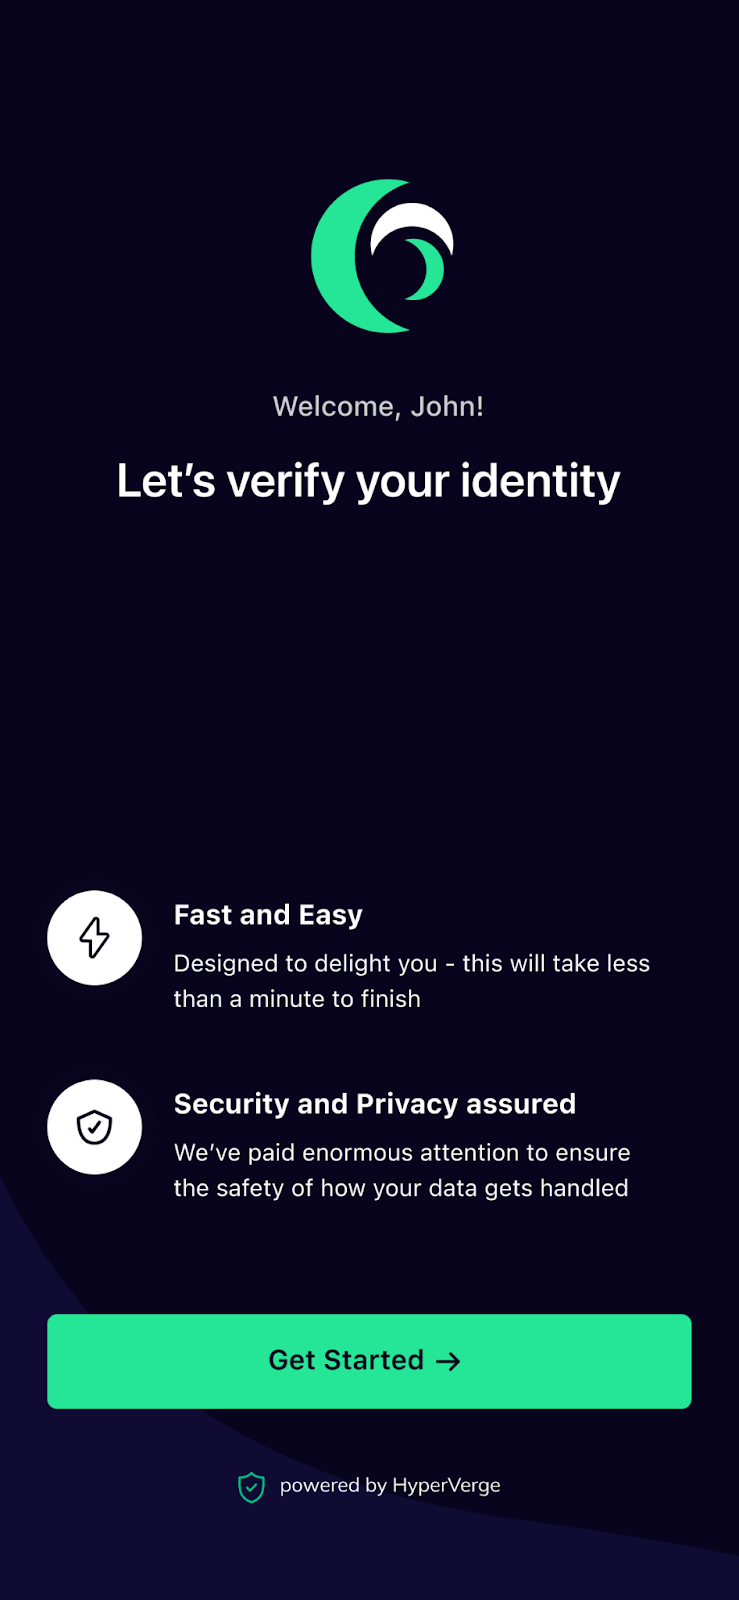 Alt: Ensure a smooth user experience in an identity verification process